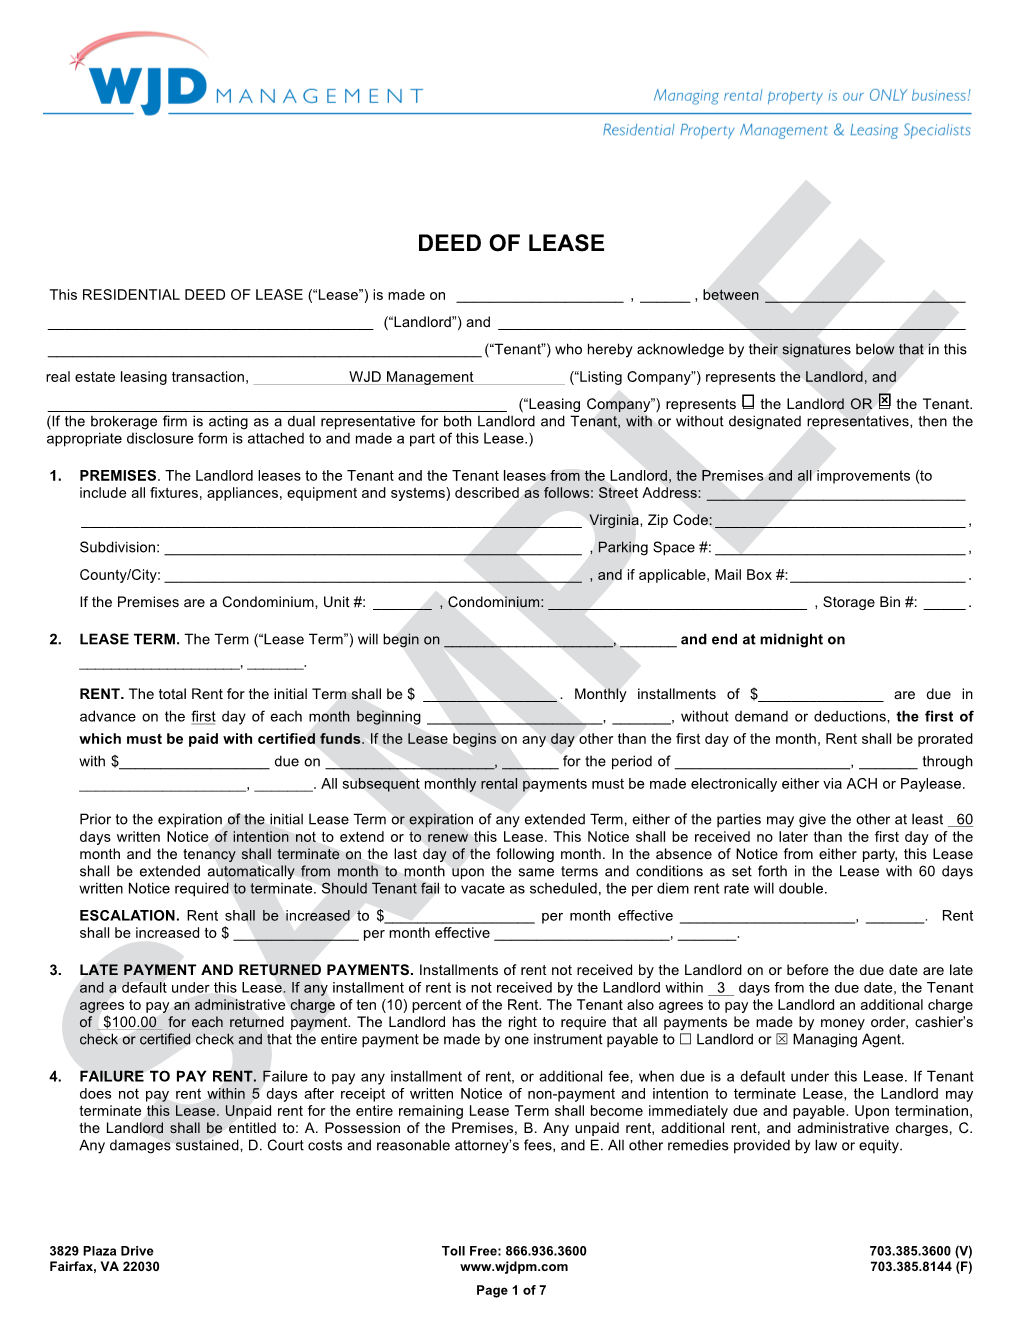 Deed of Lease